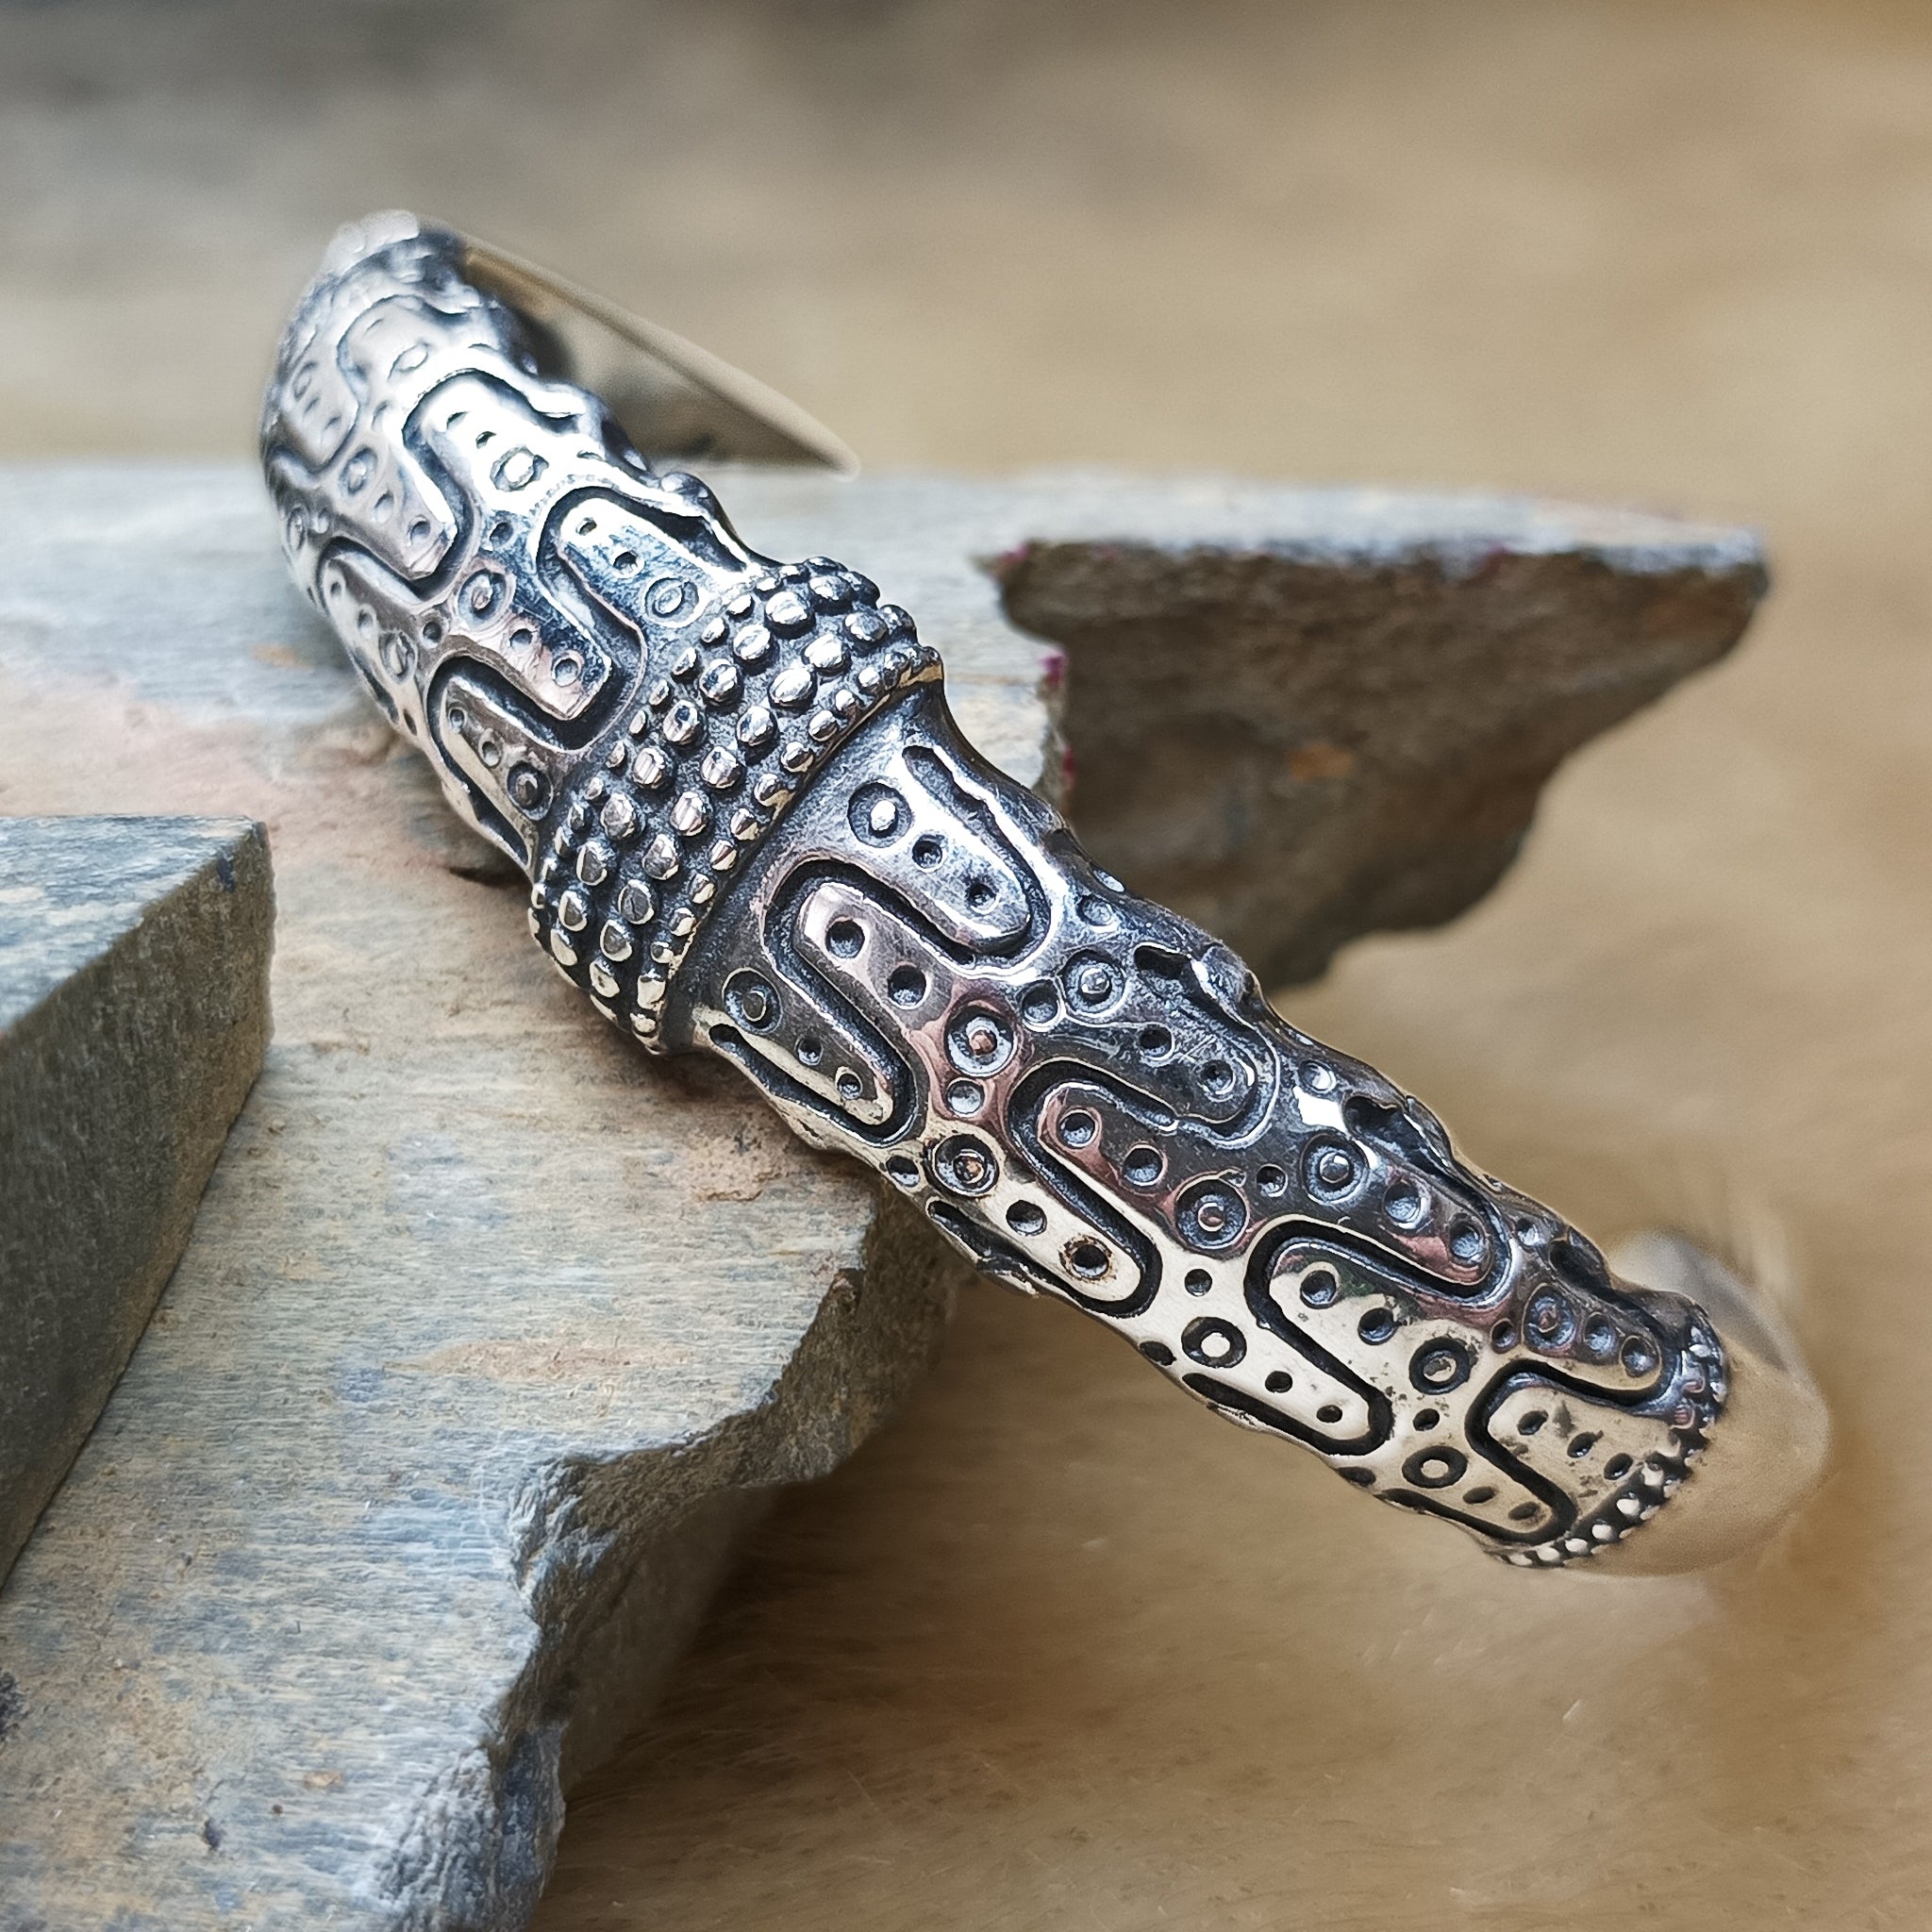 Silver Viking Bracelet from Falster on Rock - Angled View